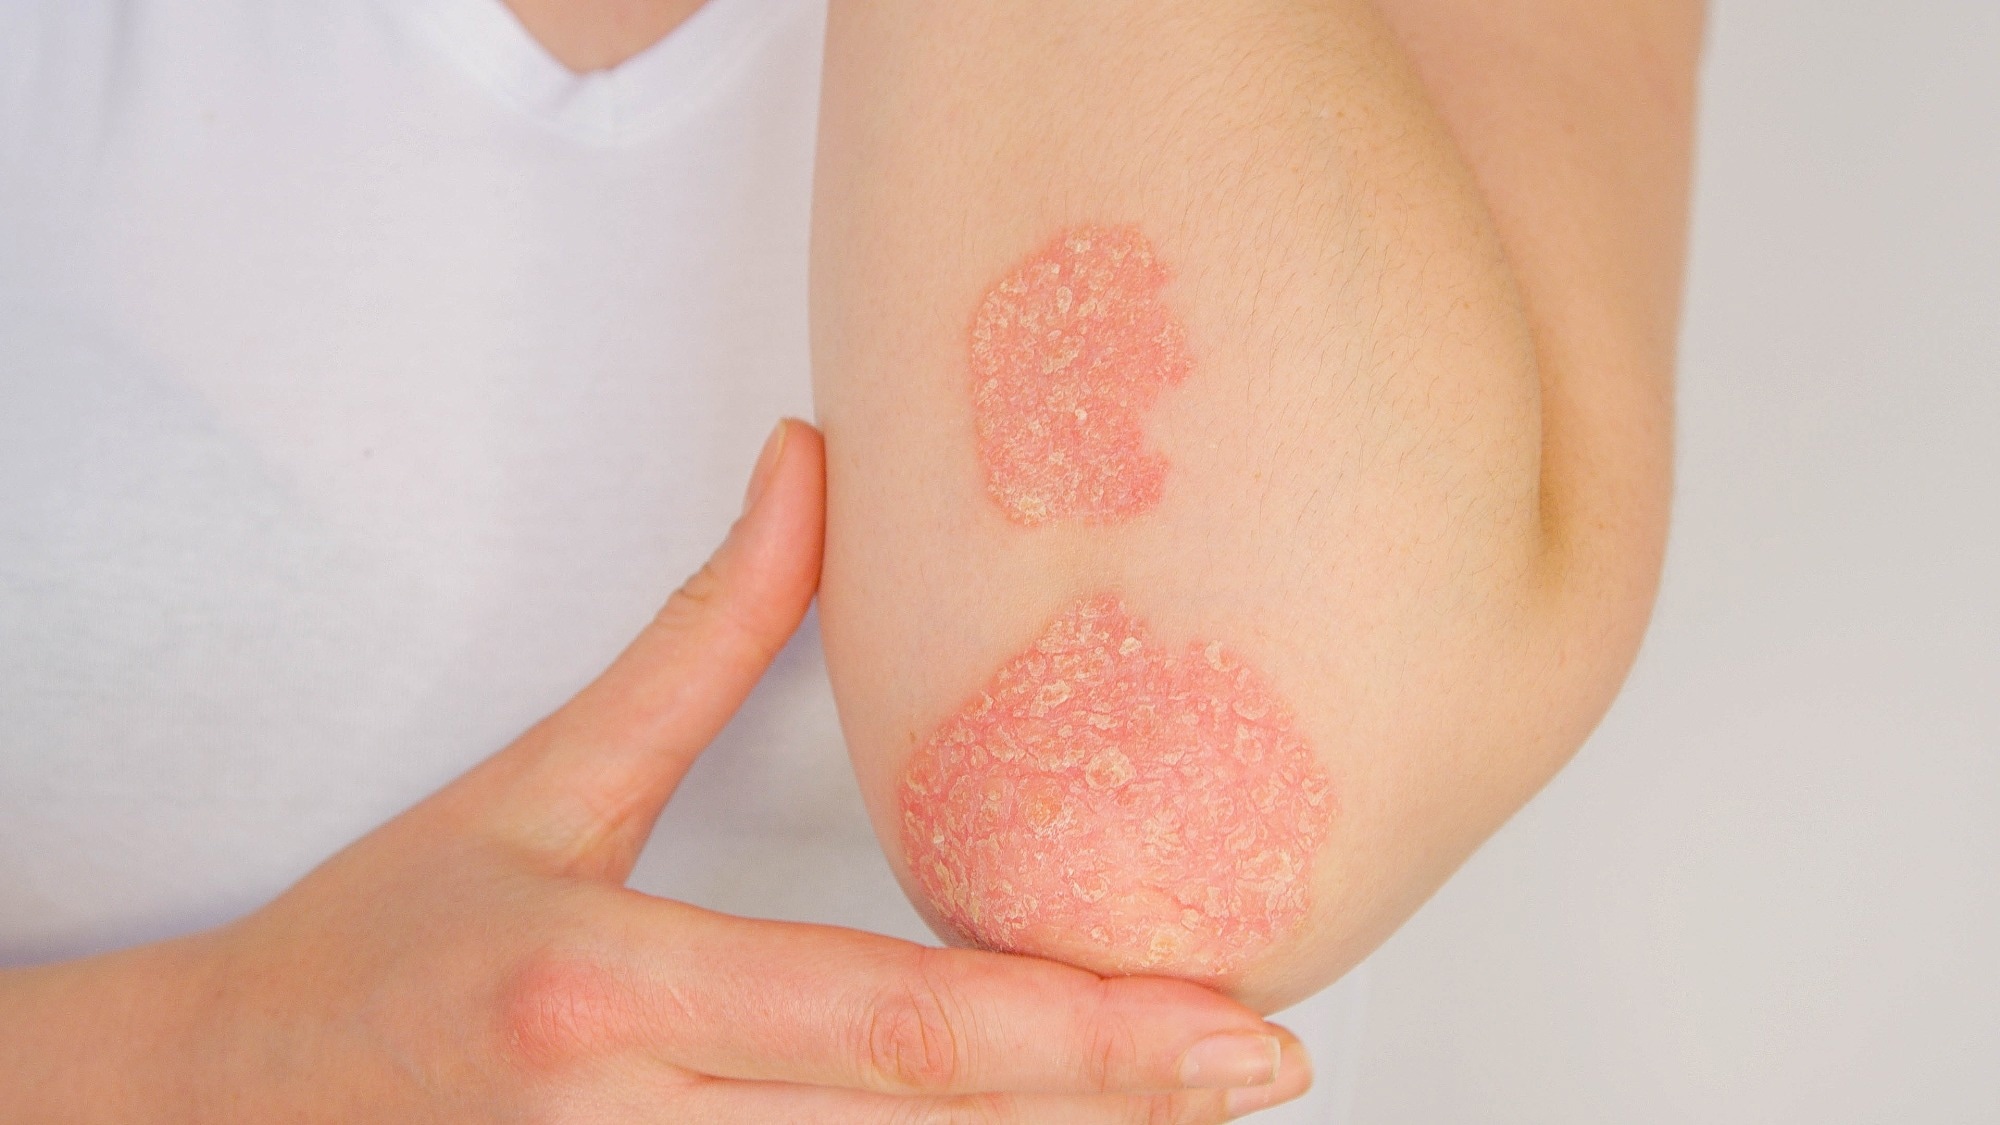 Study: Signaling pathways and targeted therapies for psoriasis. Image Credit: Flystock/Shutterstock,com